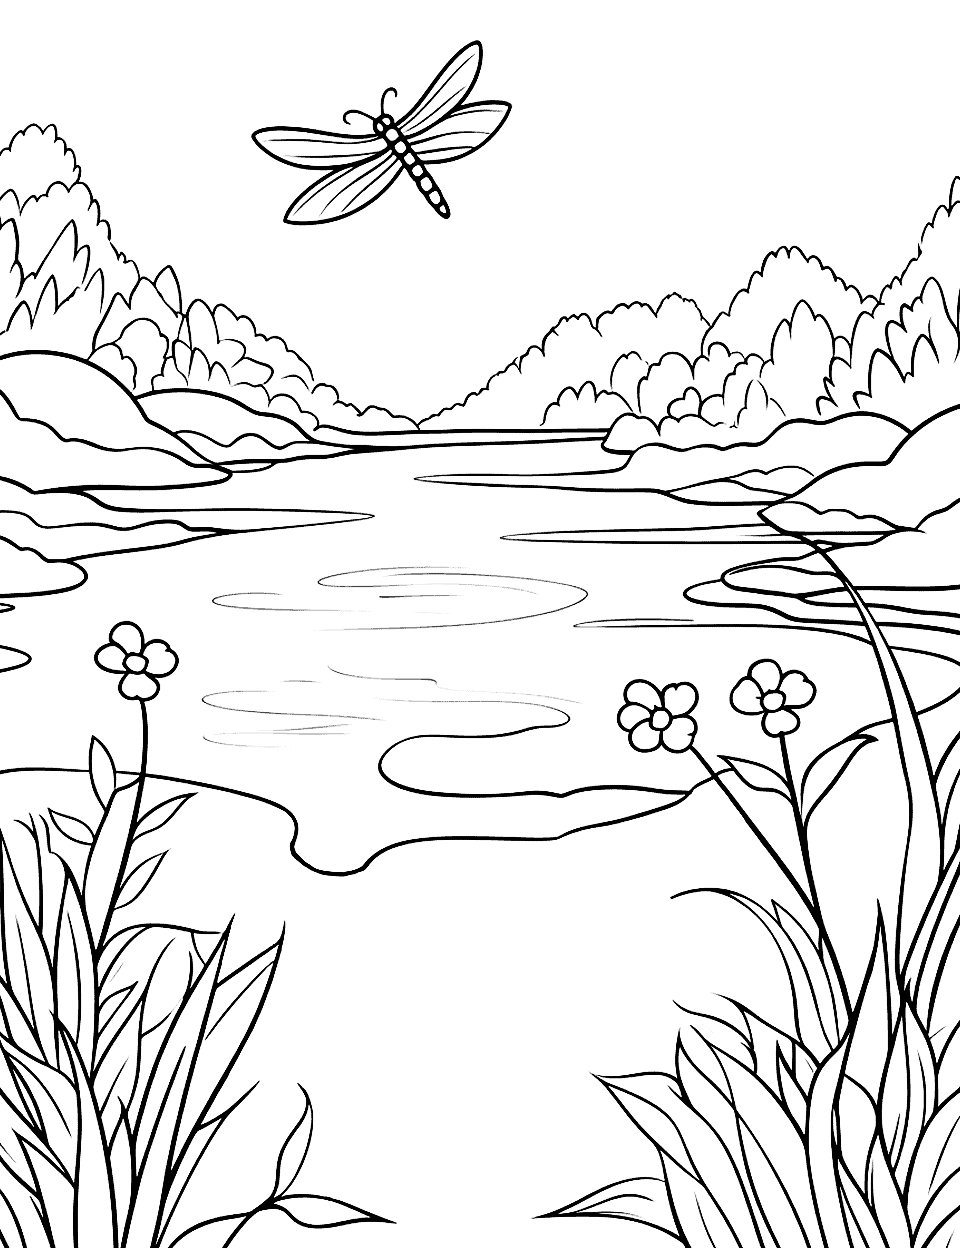 Dragonfly Over a Pond Nature Coloring Page - A dragonfly flying over a pond with flowers.